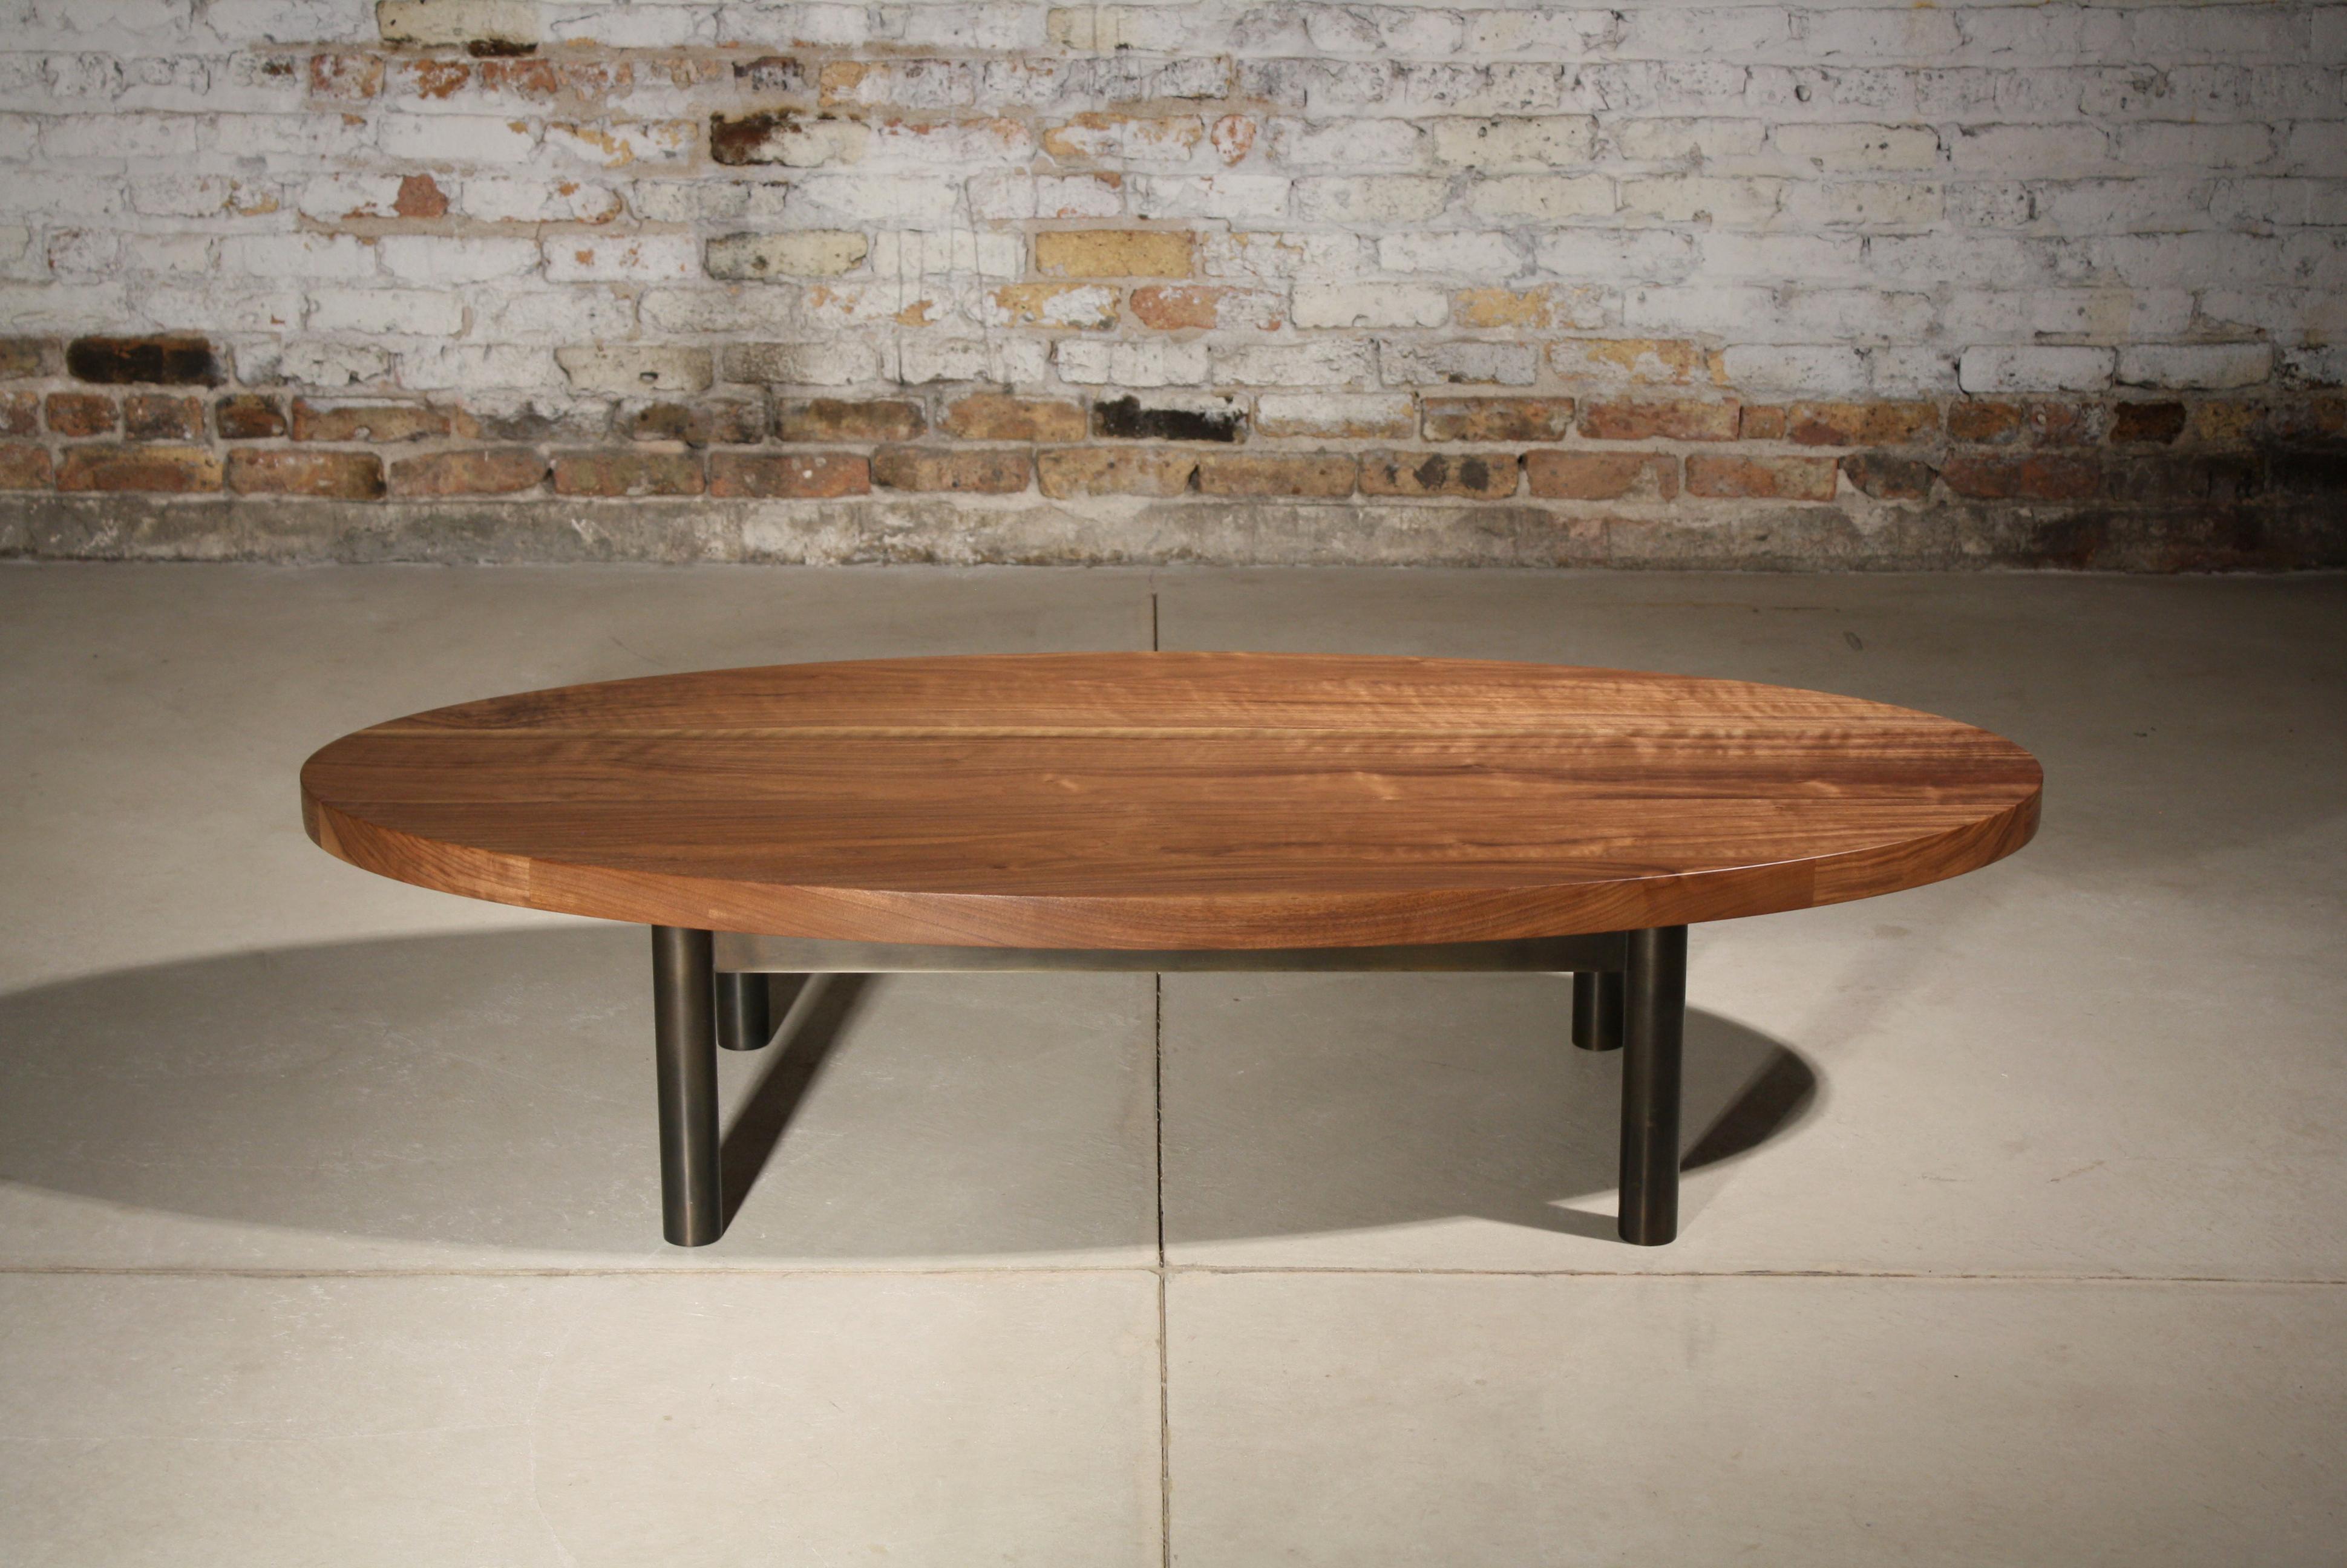 shown in natural walnut and blackened steel with an oval top

Measures: 60